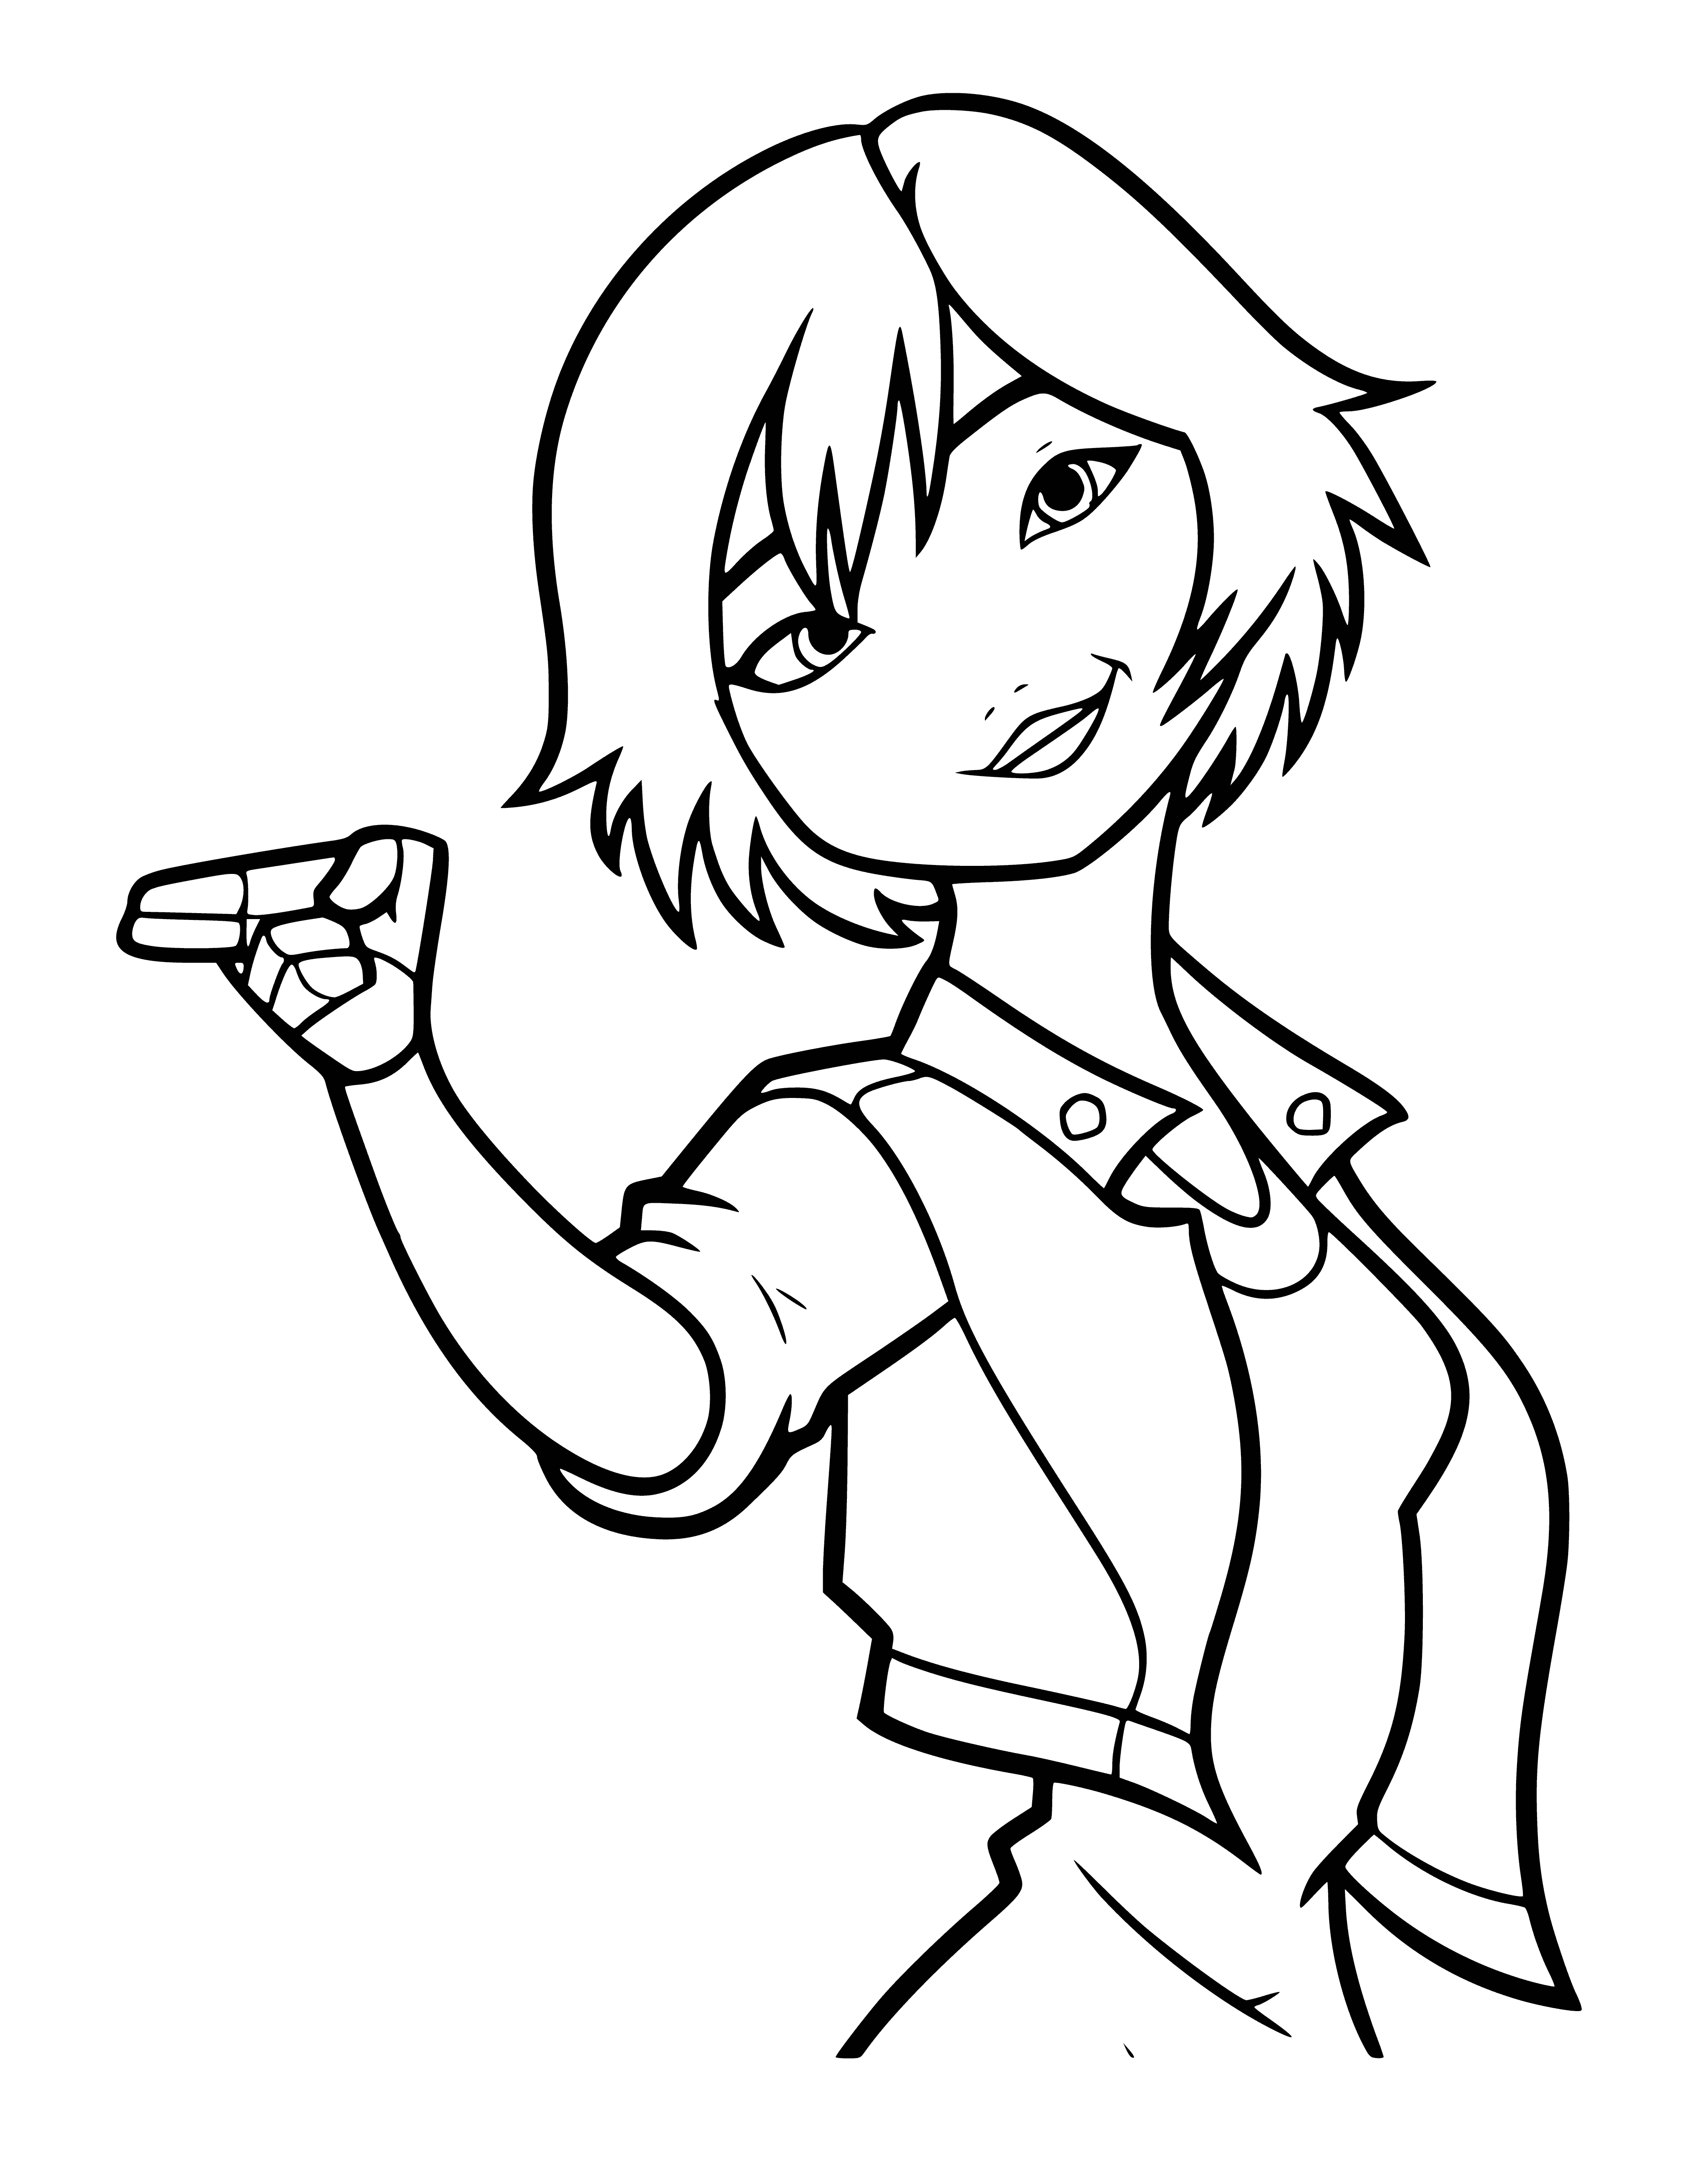 GoGo Tomago coloring page